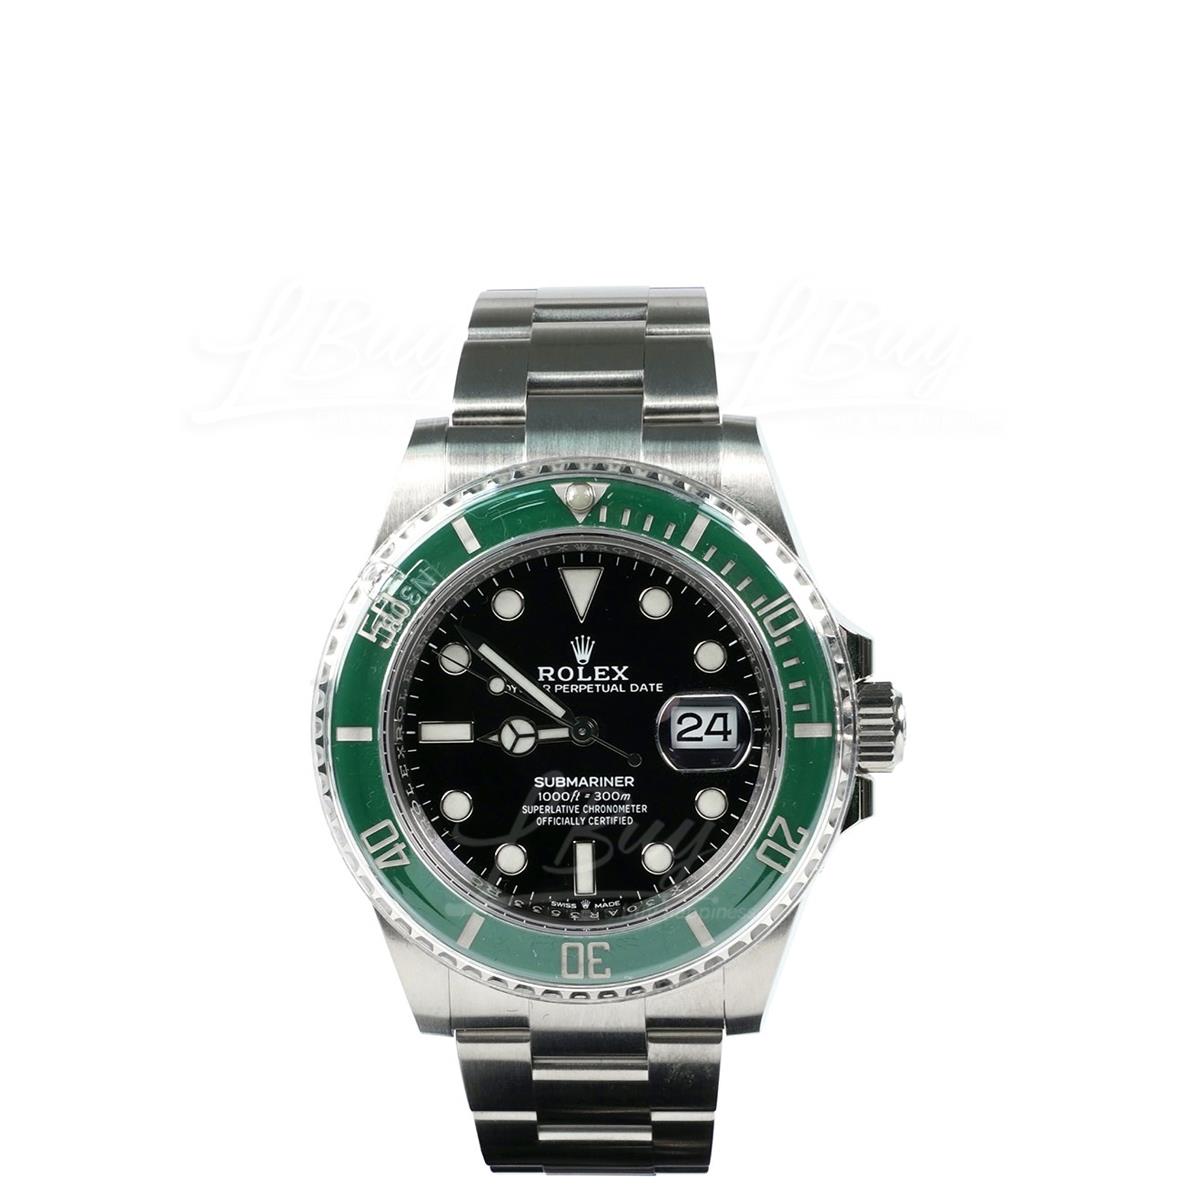 Rolex 116610LV Oyster Perpetual Submariner Date Hulk 40mm 116610LV Watch